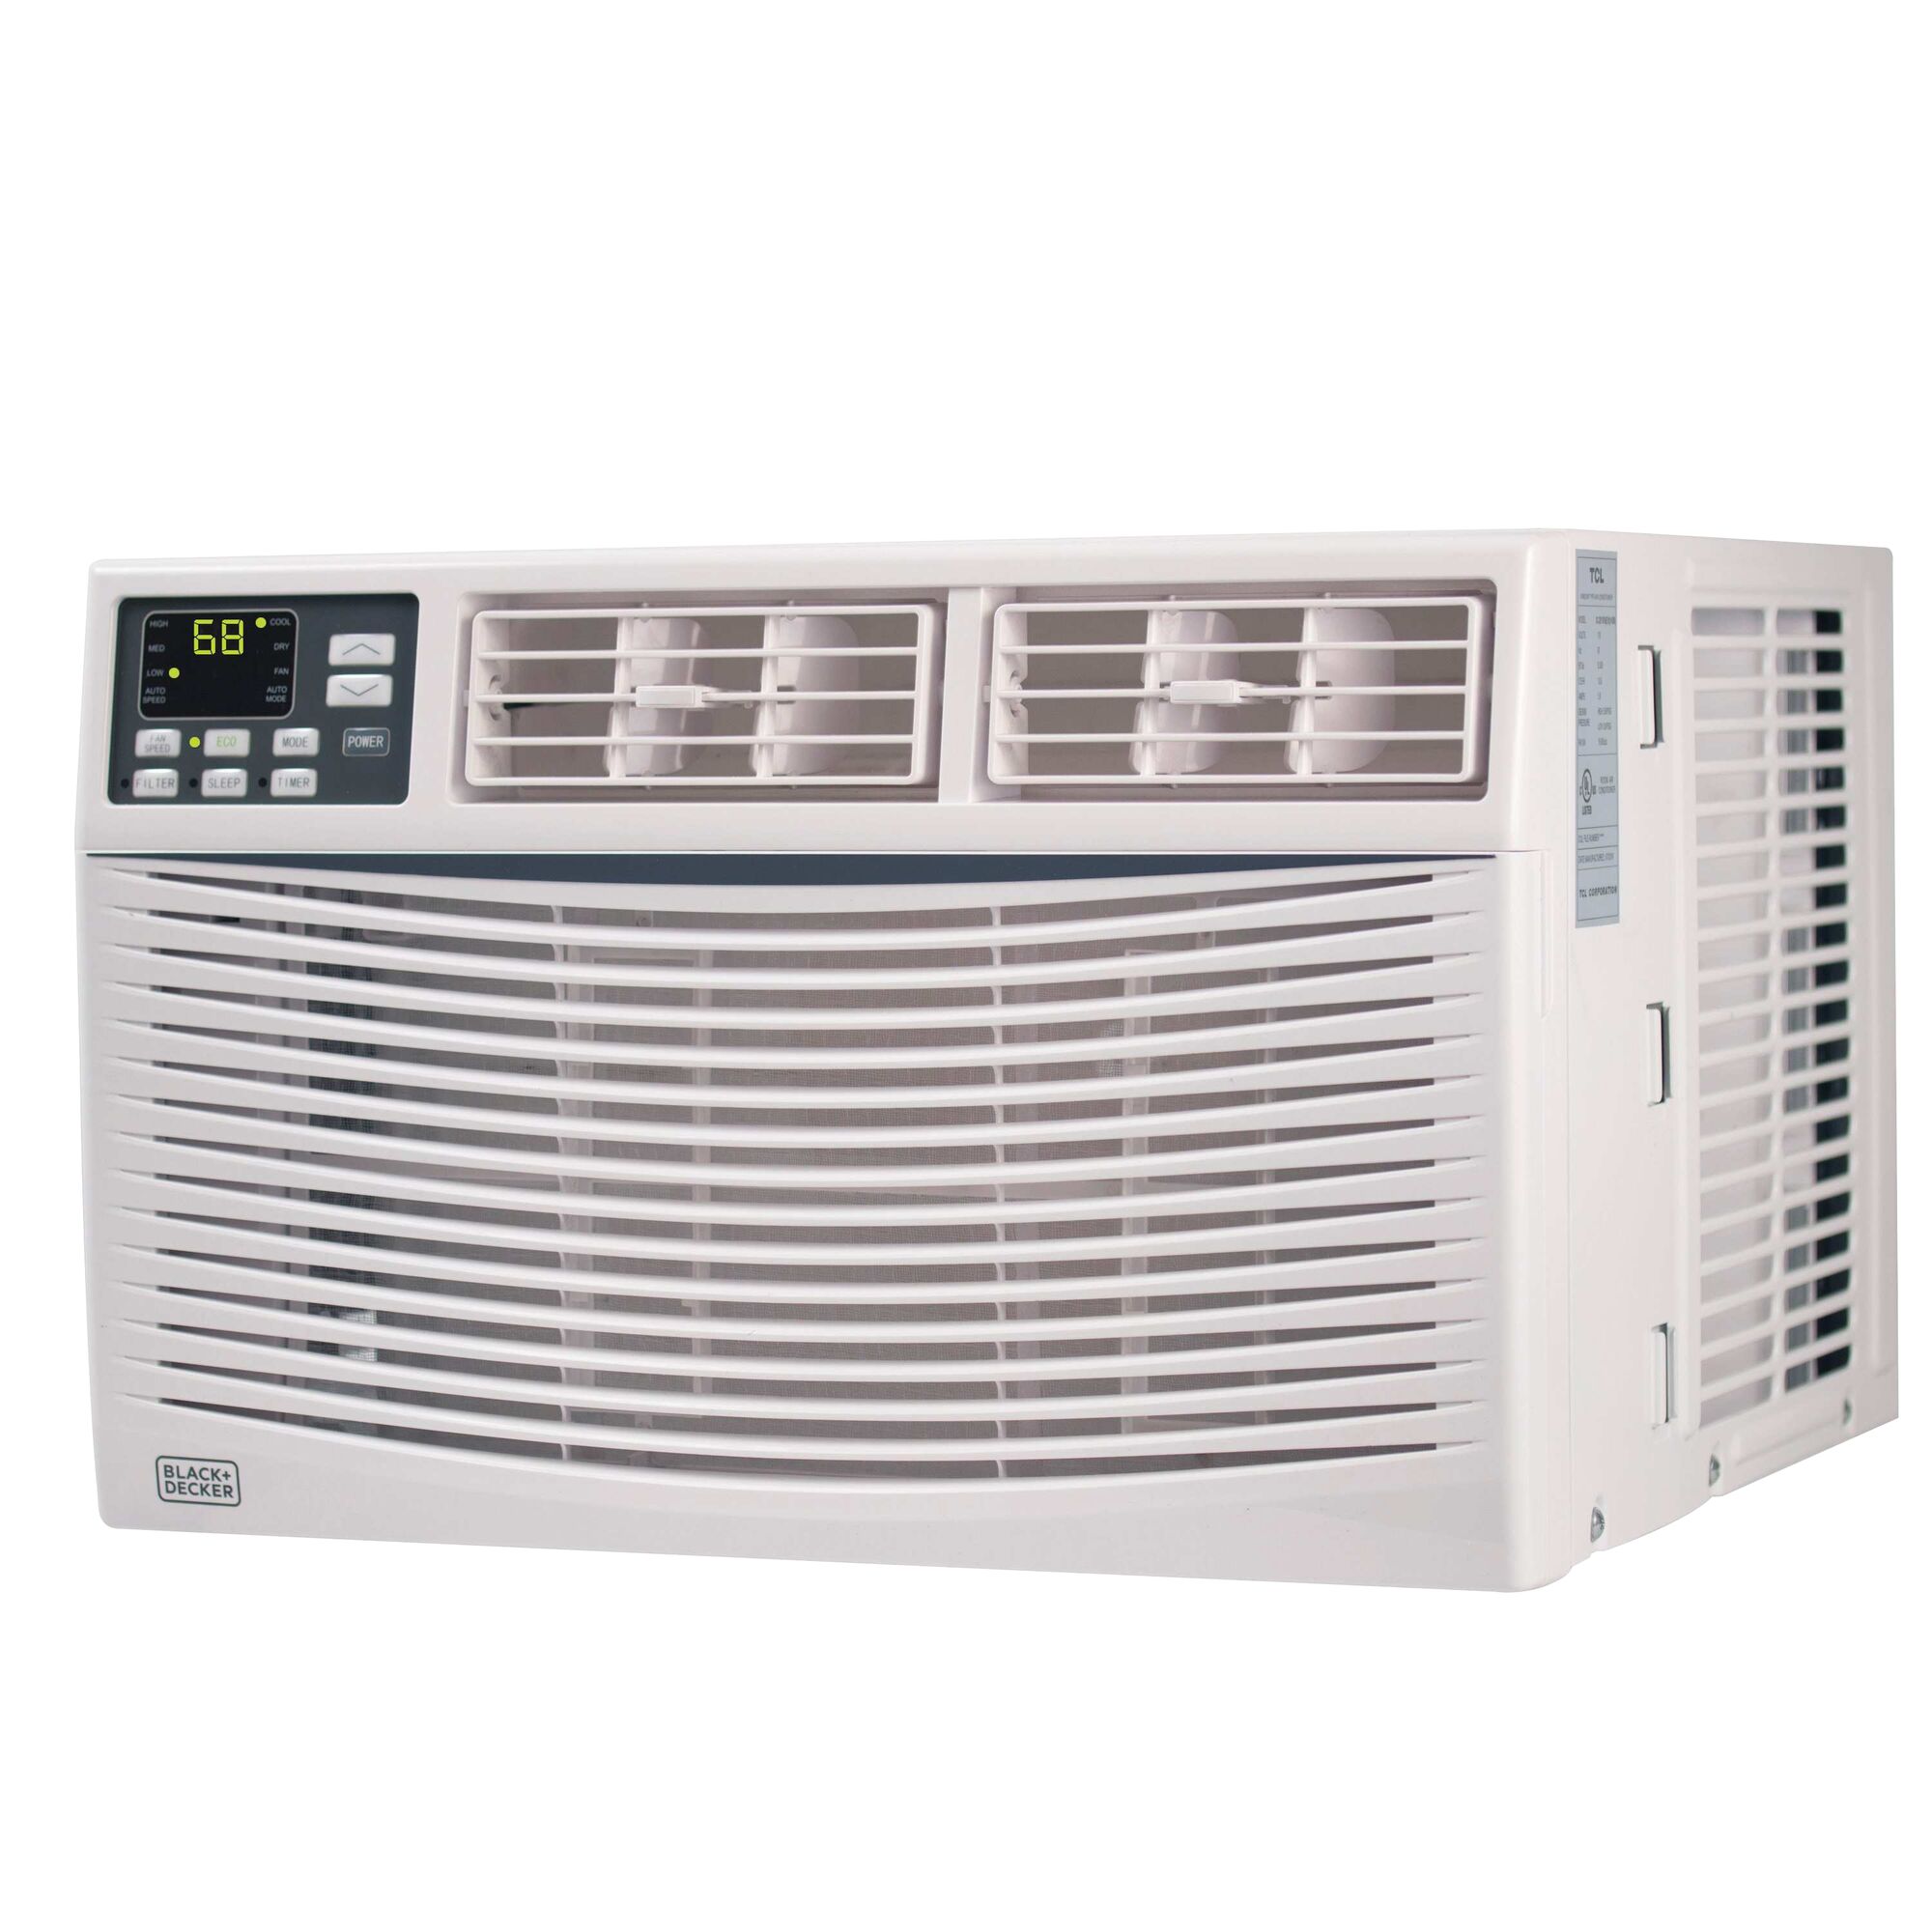 Profile of 8,000 British Thermal Unit energy star electric air conditioner with remote.